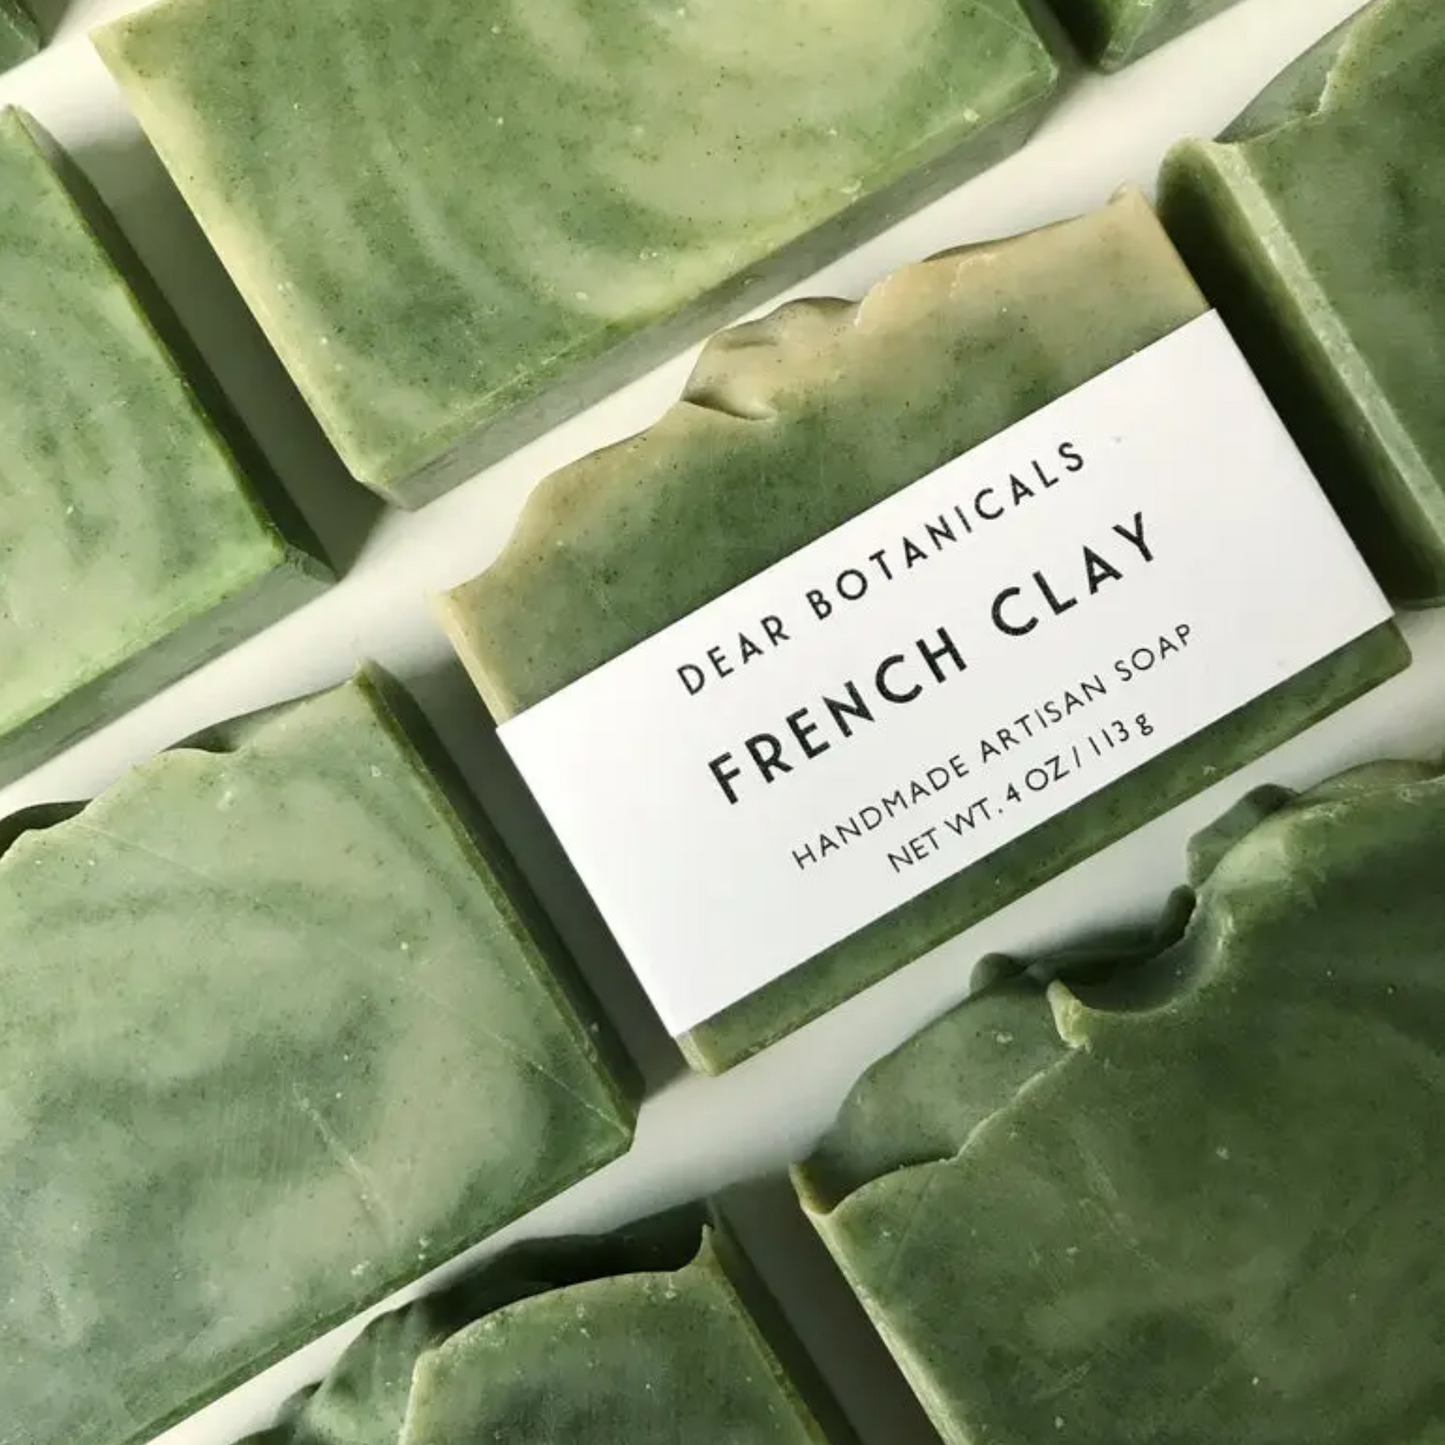 French Clay Hand Crafted Soap